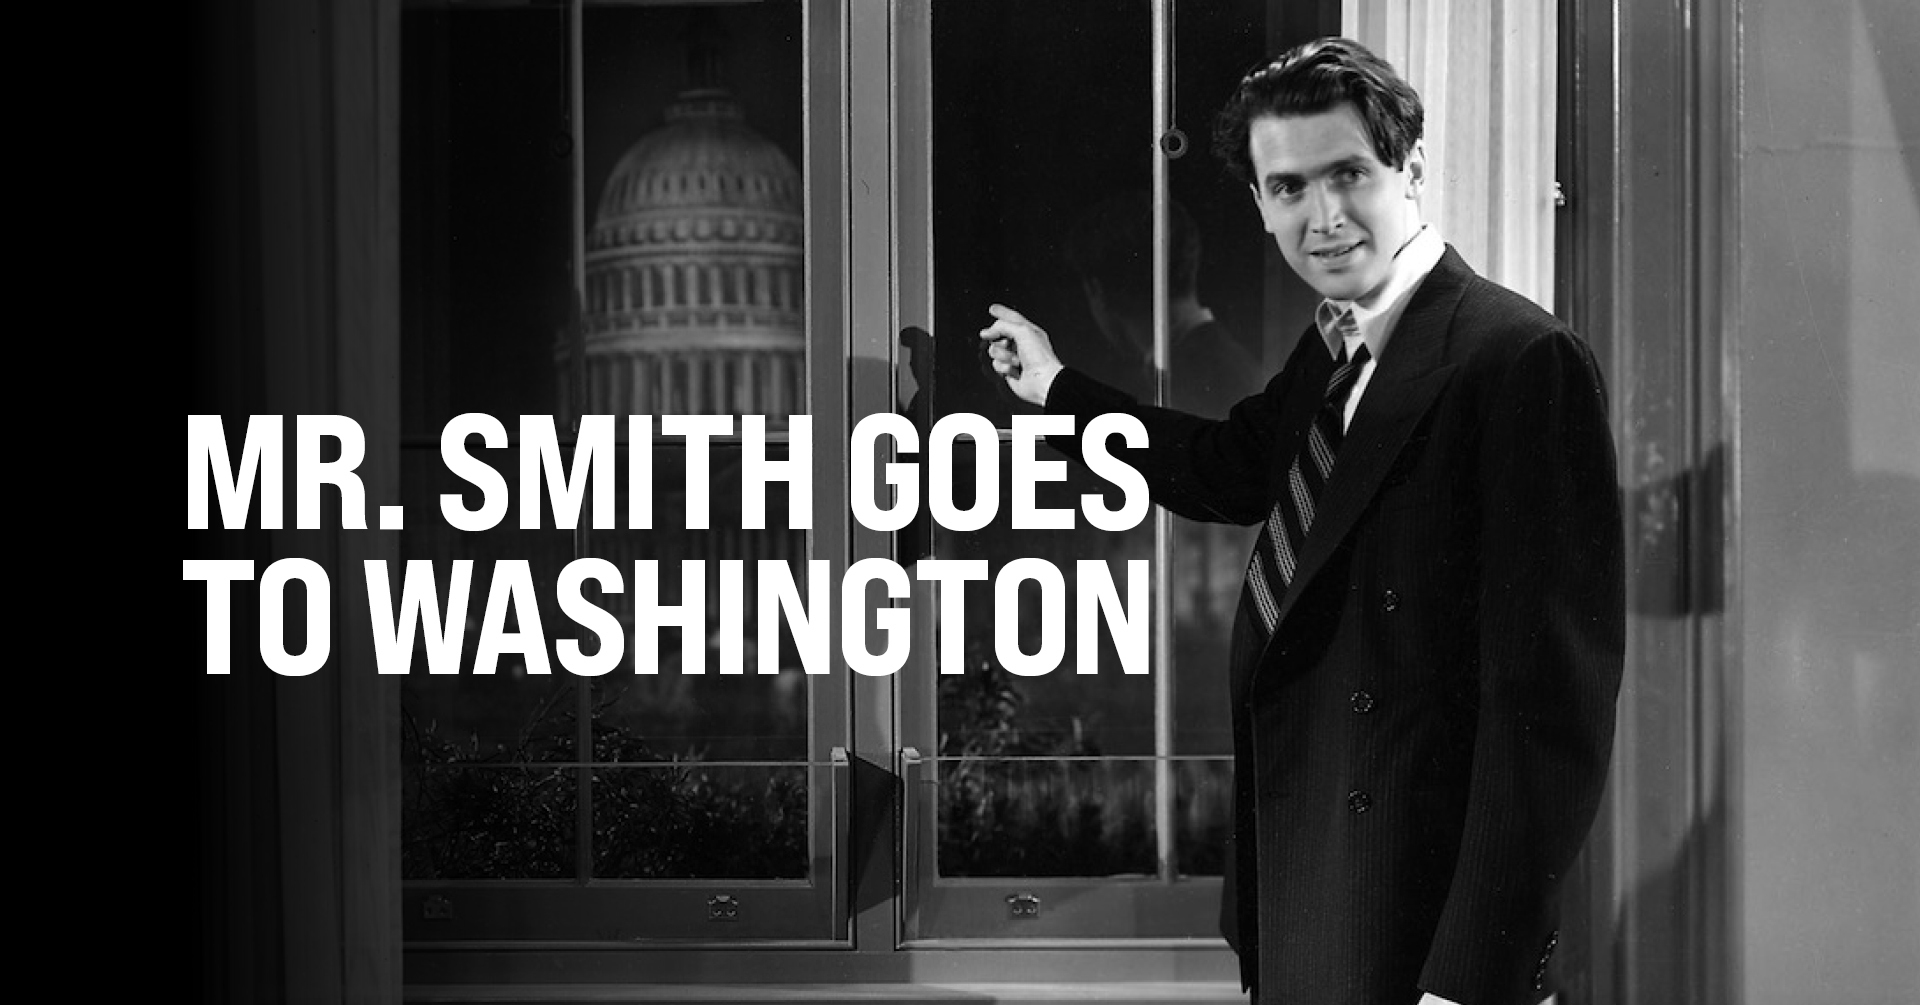 49-facts-about-the-movie-mr-smith-goes-to-washington